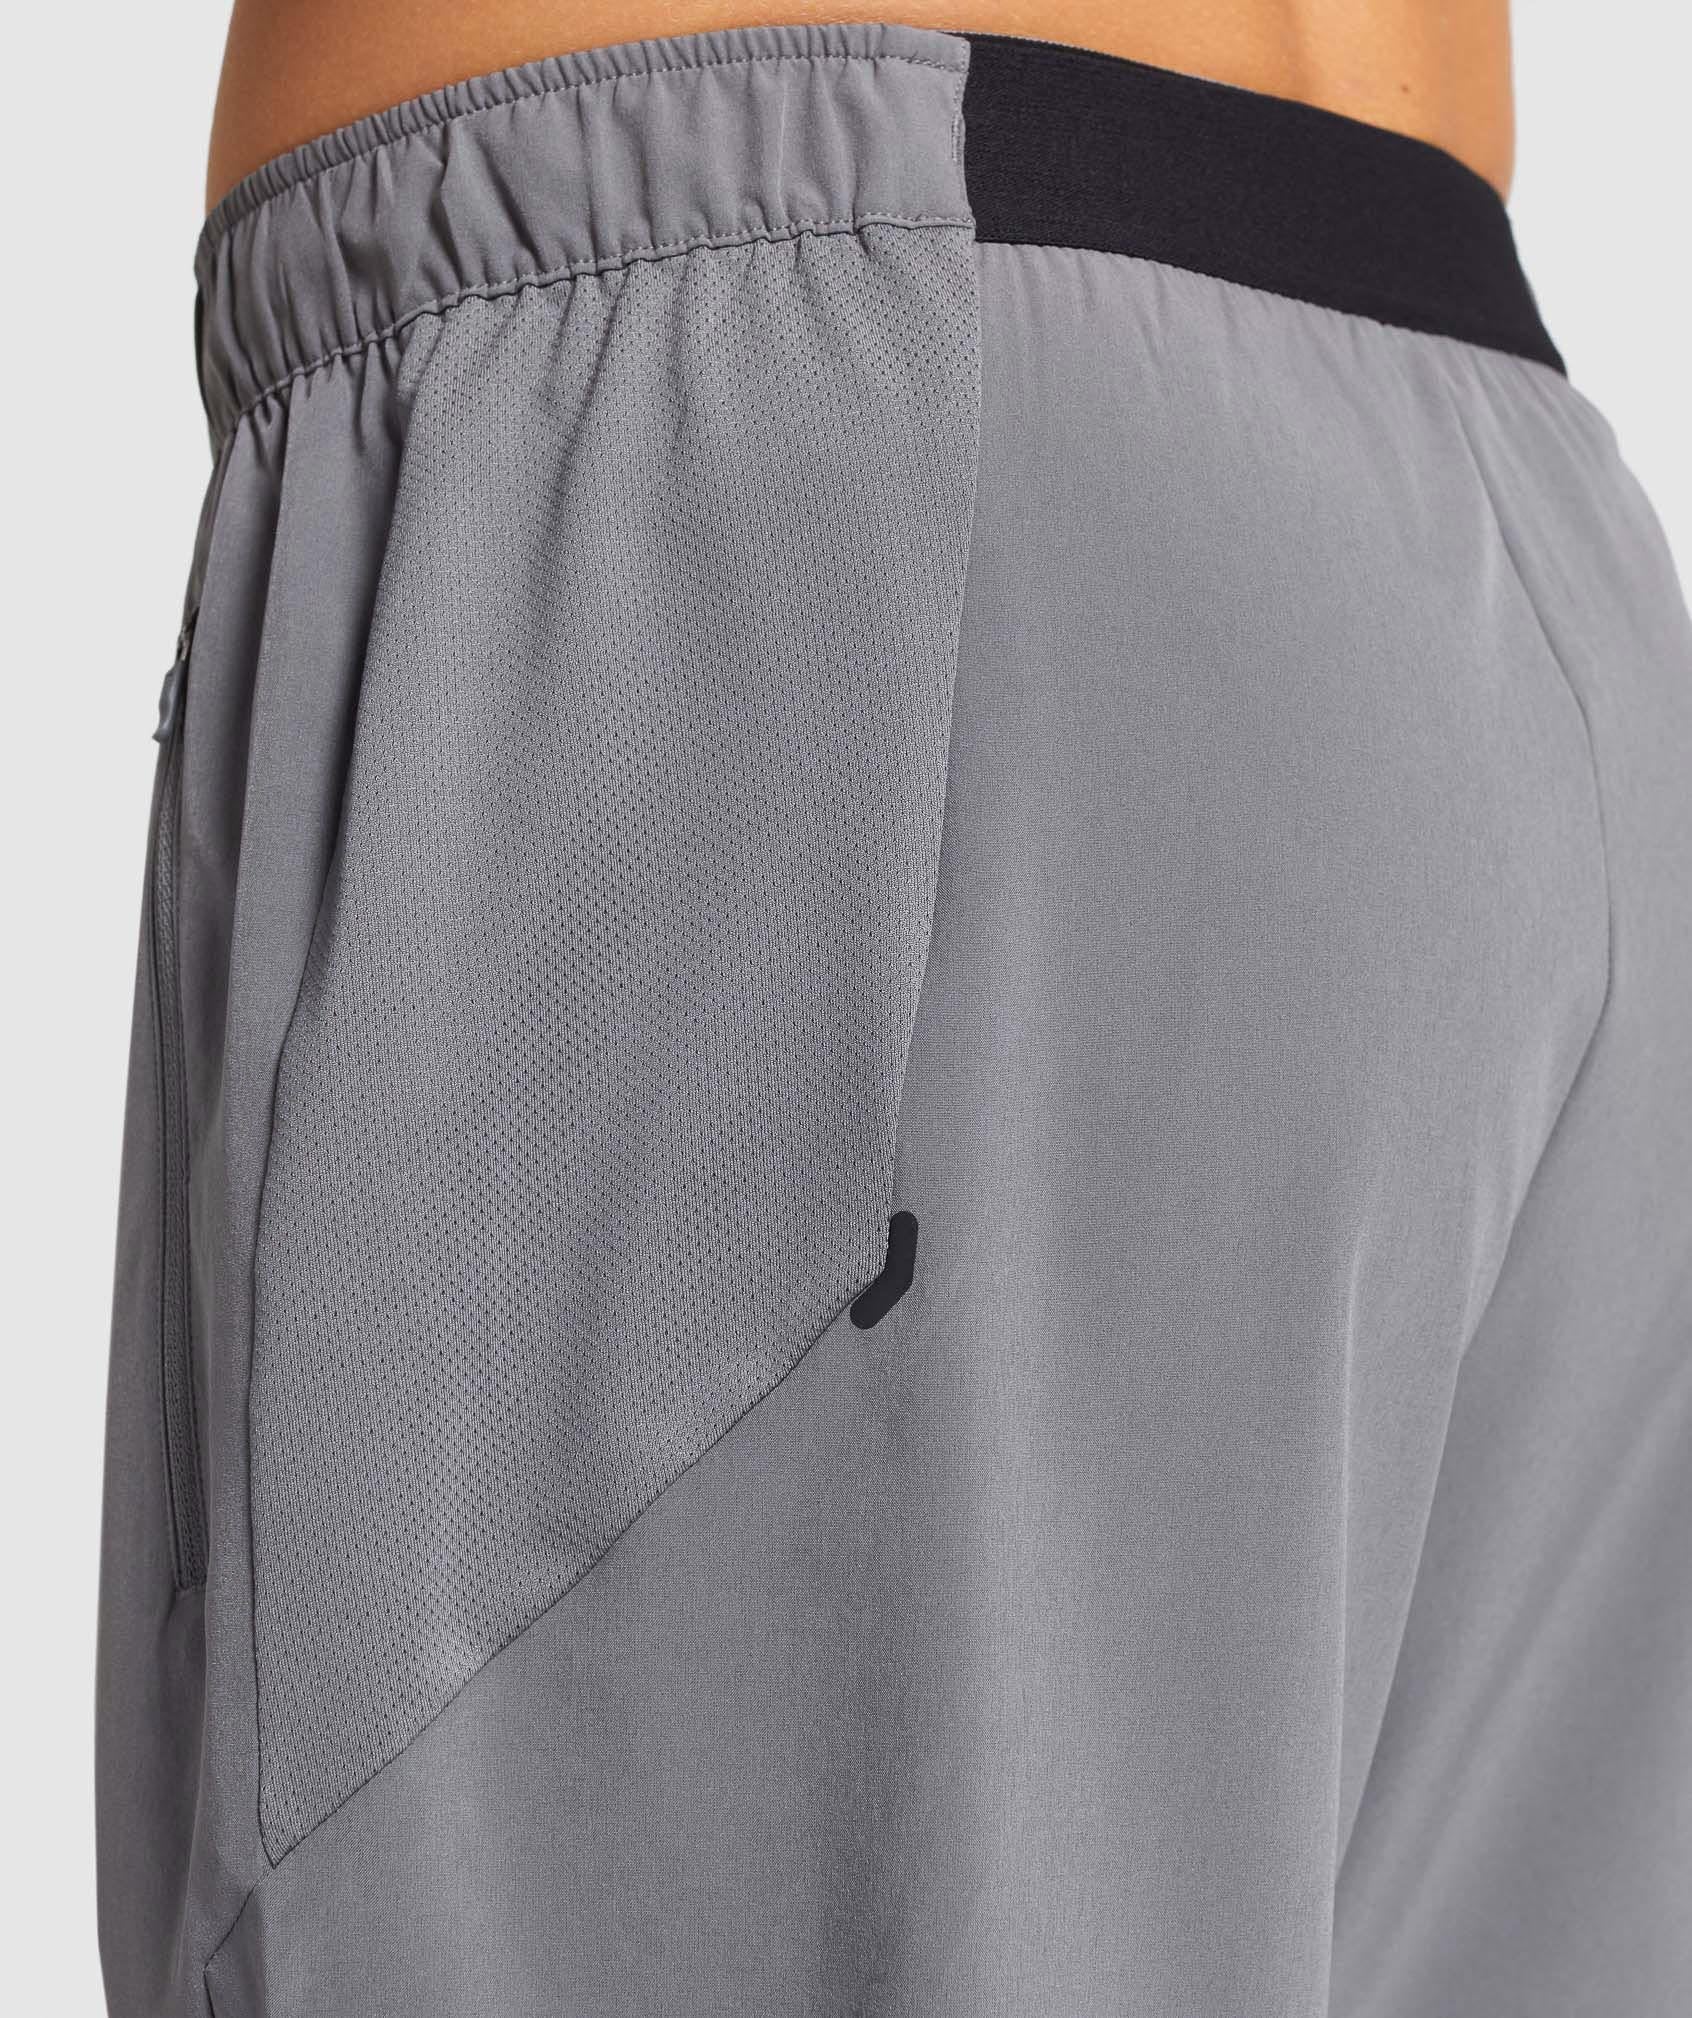 Element Hiit 9" Shorts in Grey - view 6